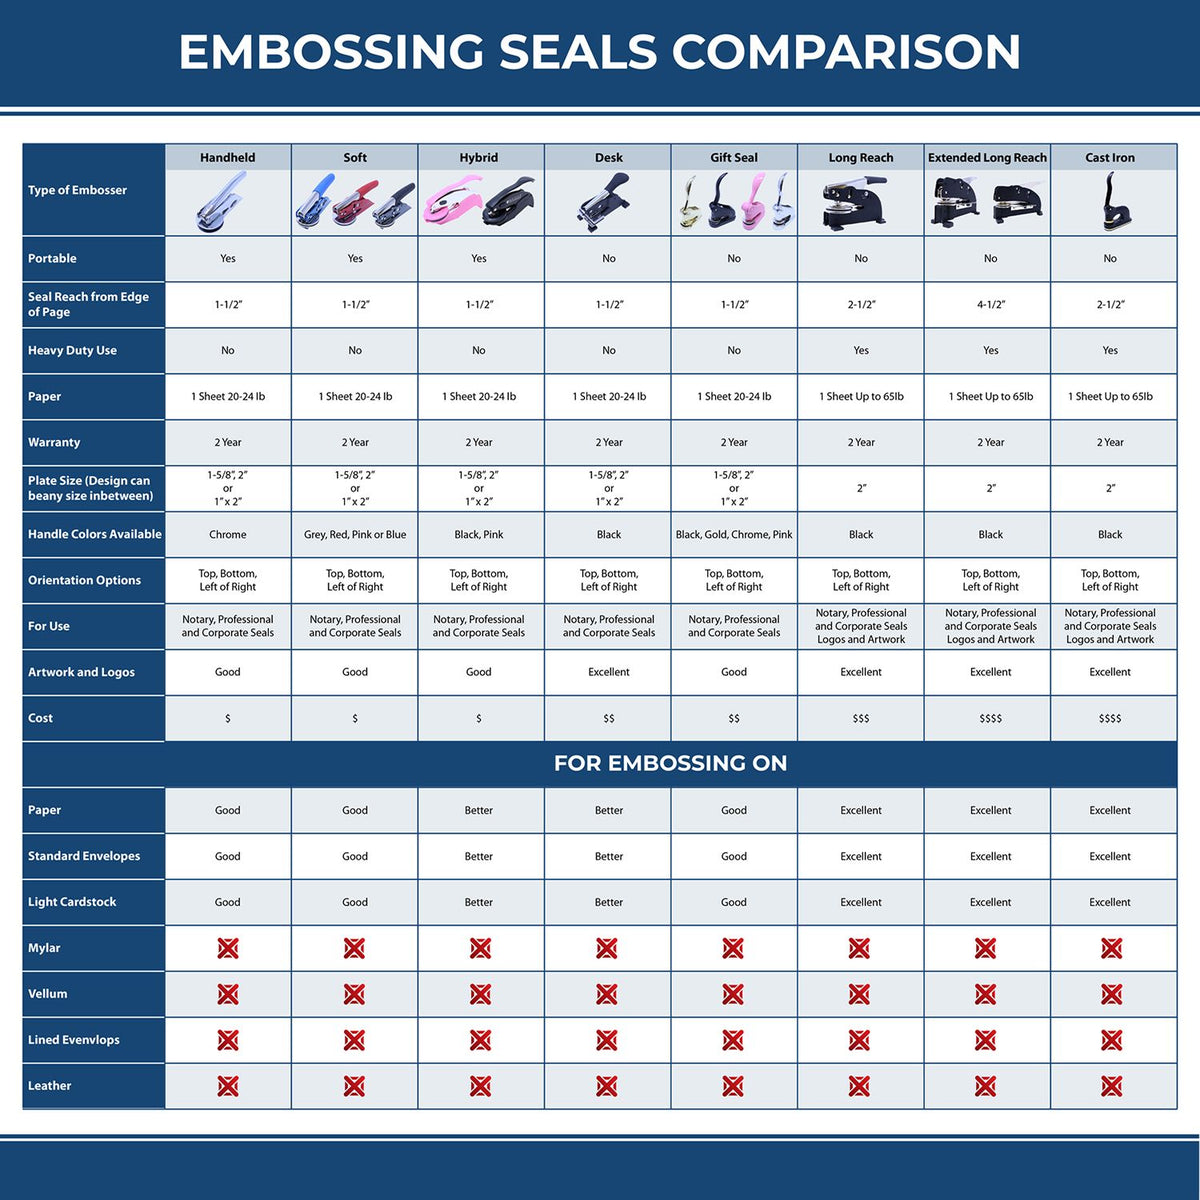 A comparison chart for the different types of mount models available for the Gift Maryland Land Surveyor Seal